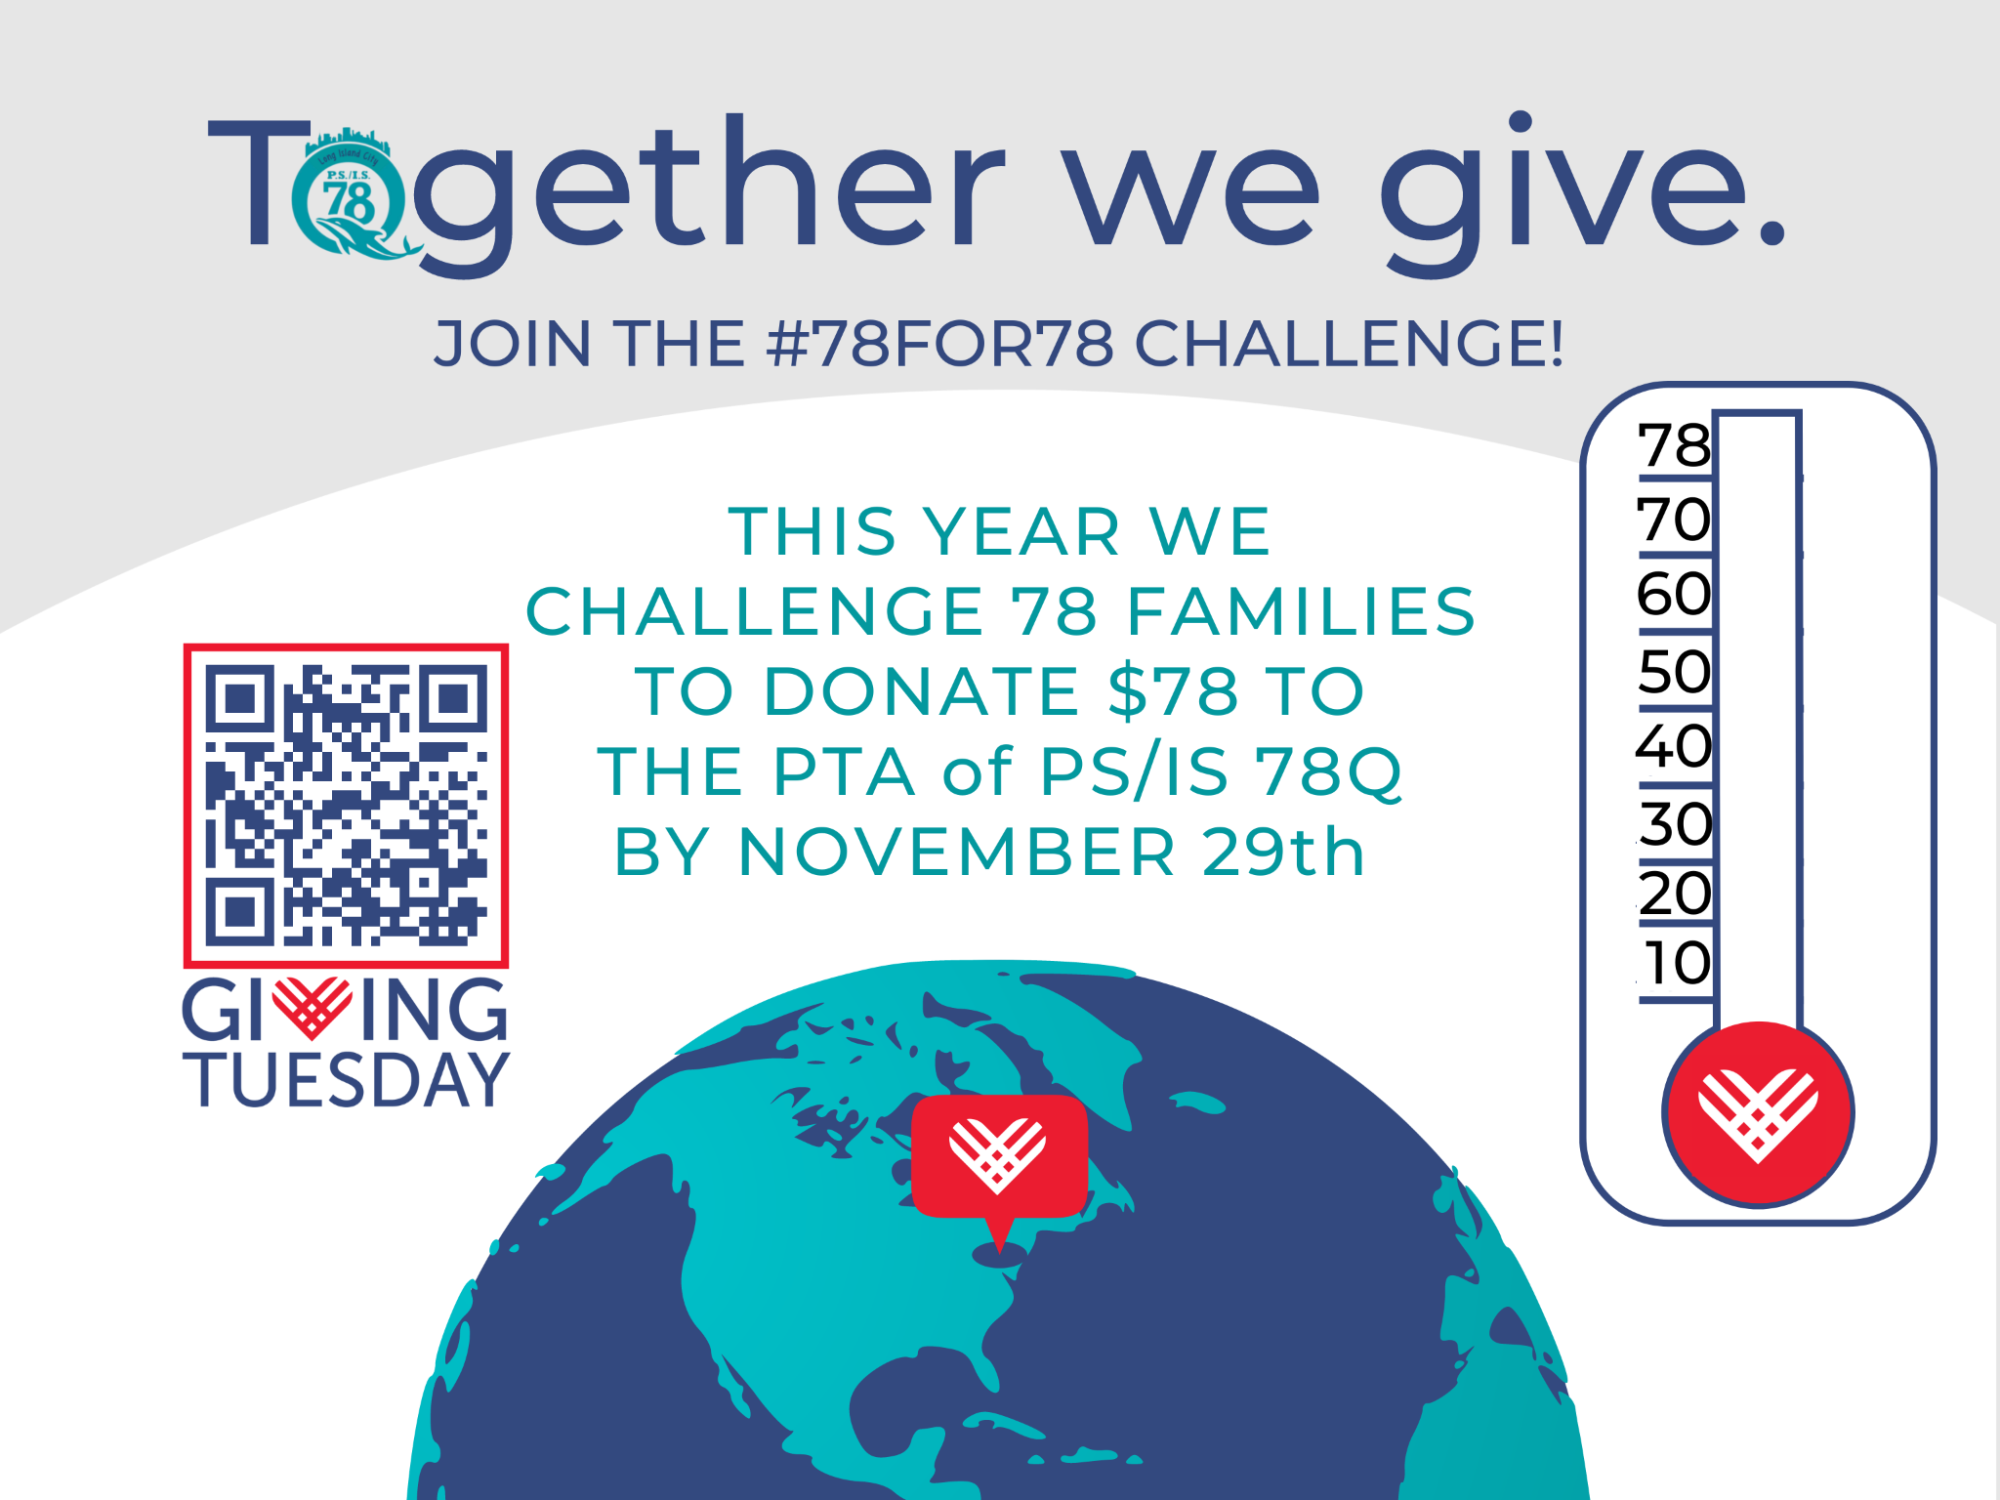 Giving Tuesday - $78 for 78